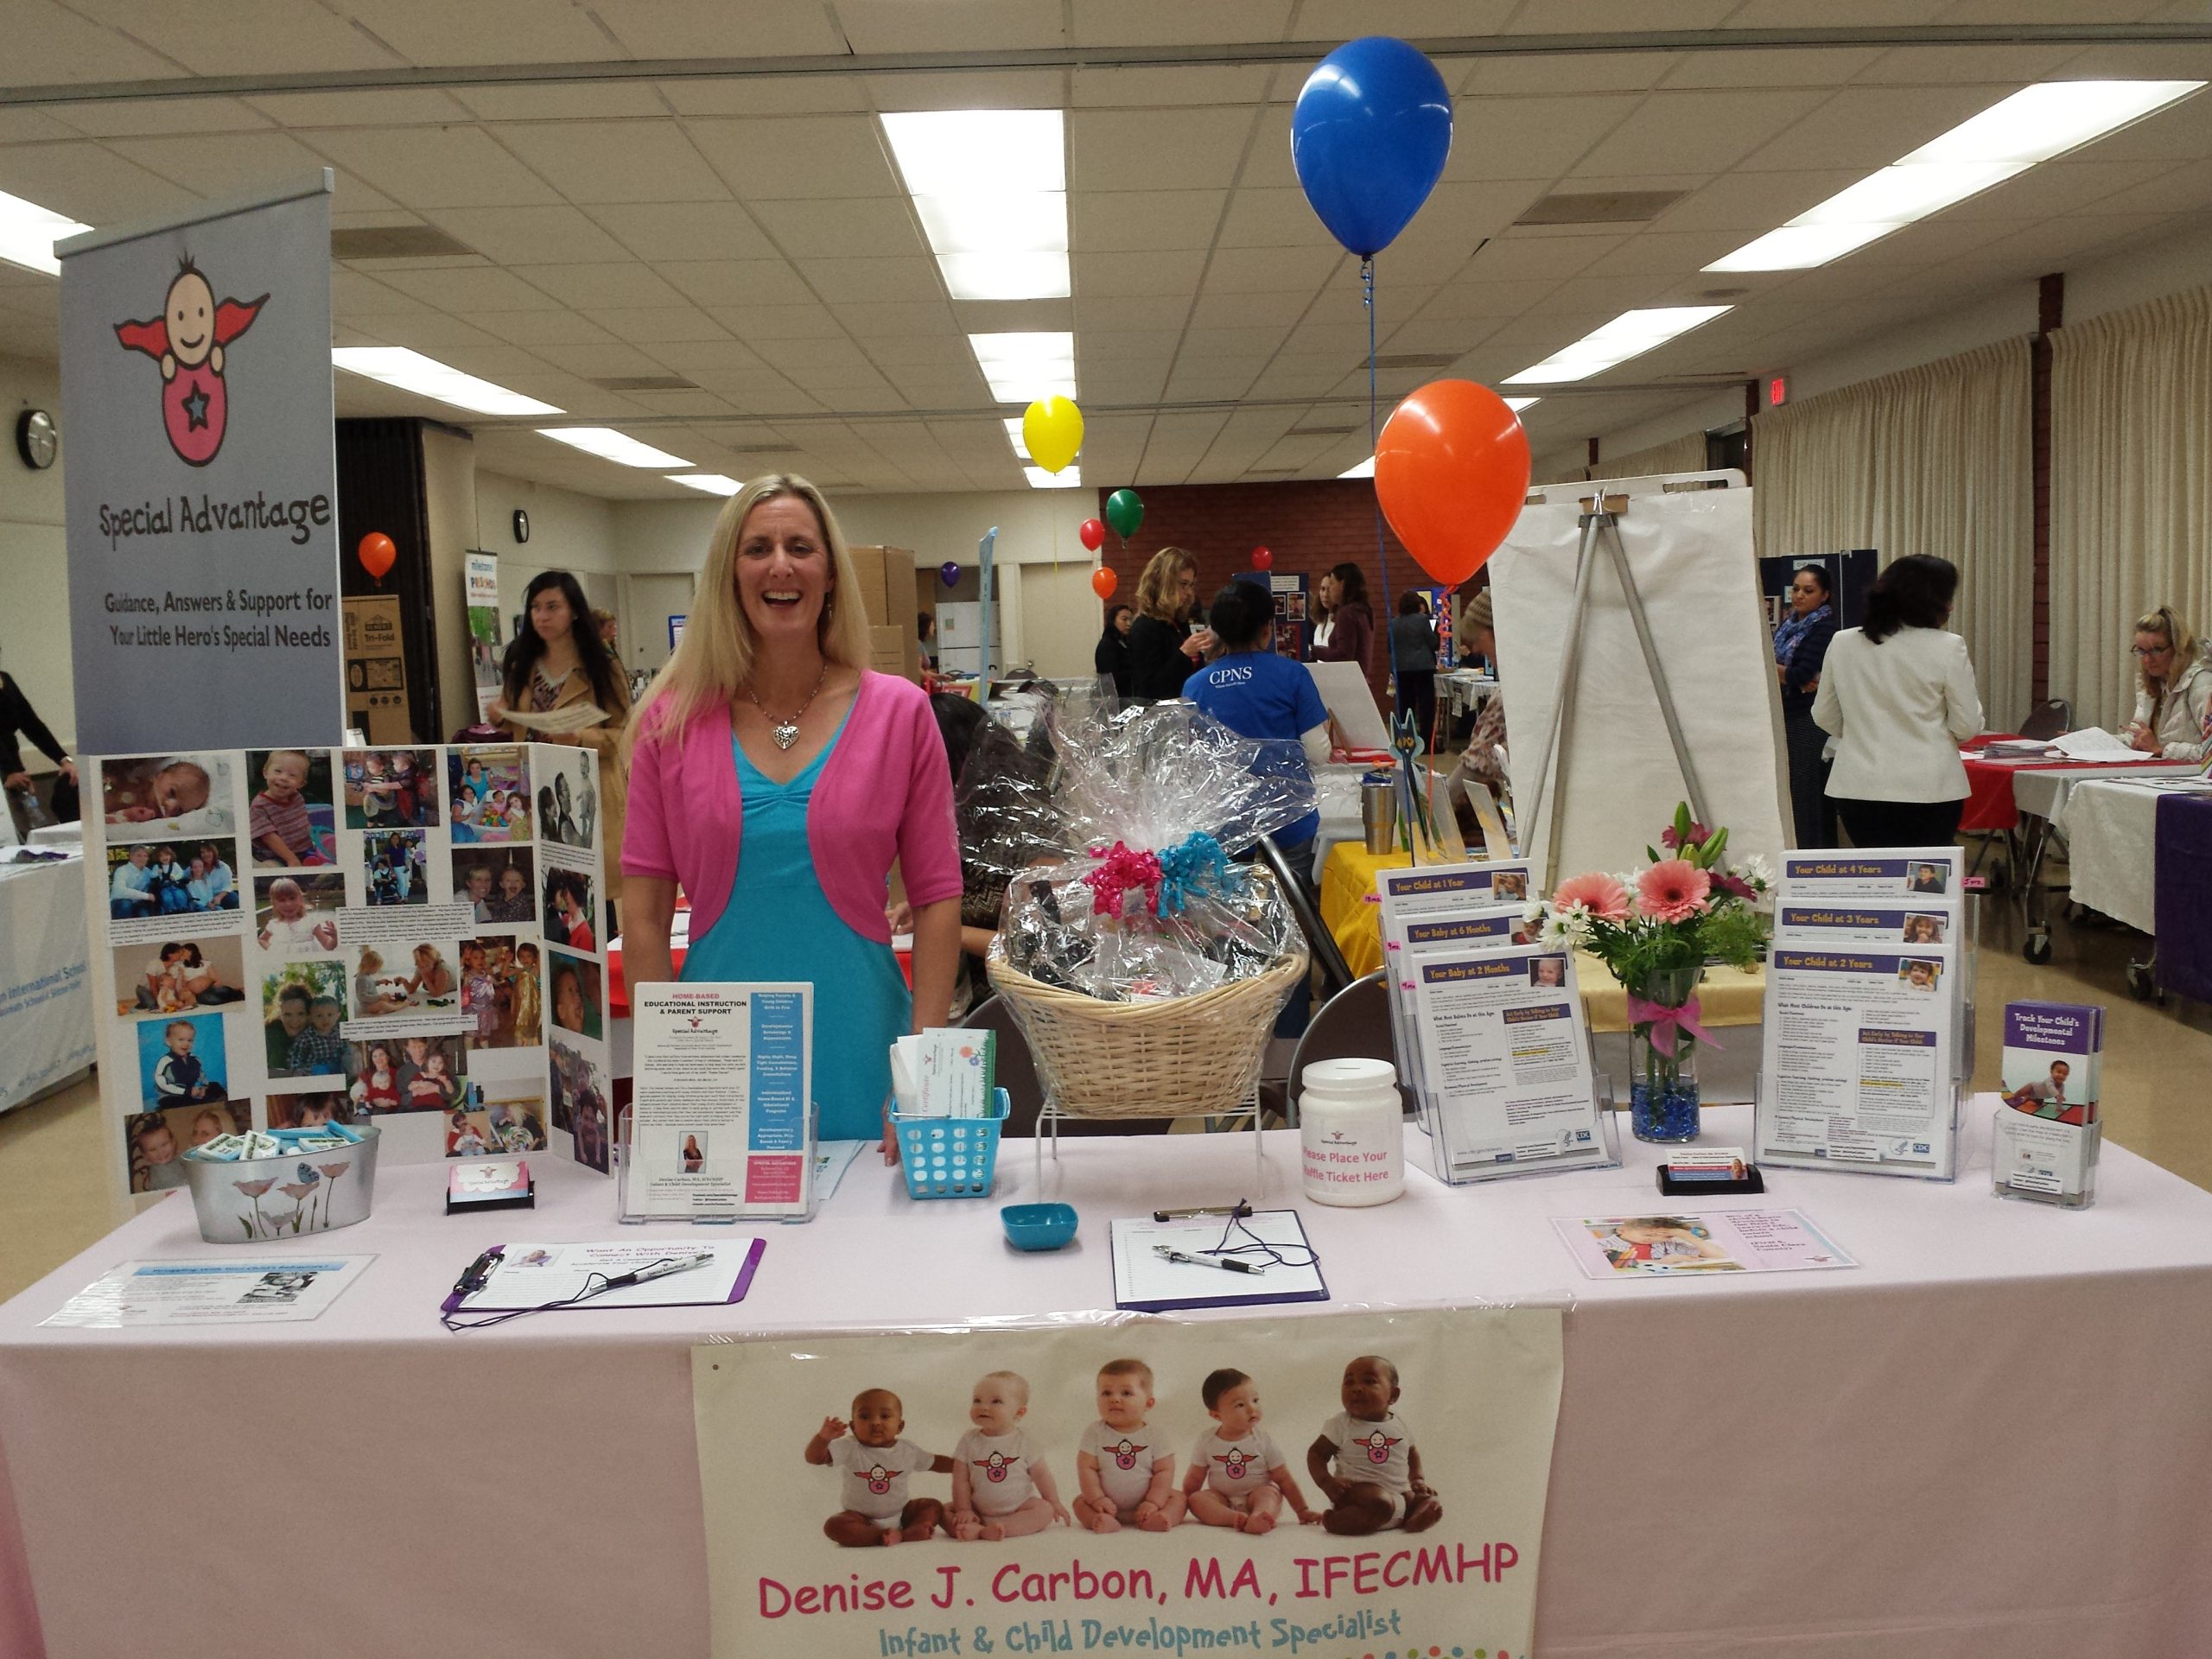 “Preschool Preview Night” in Redwood City – Come Join the Fun!